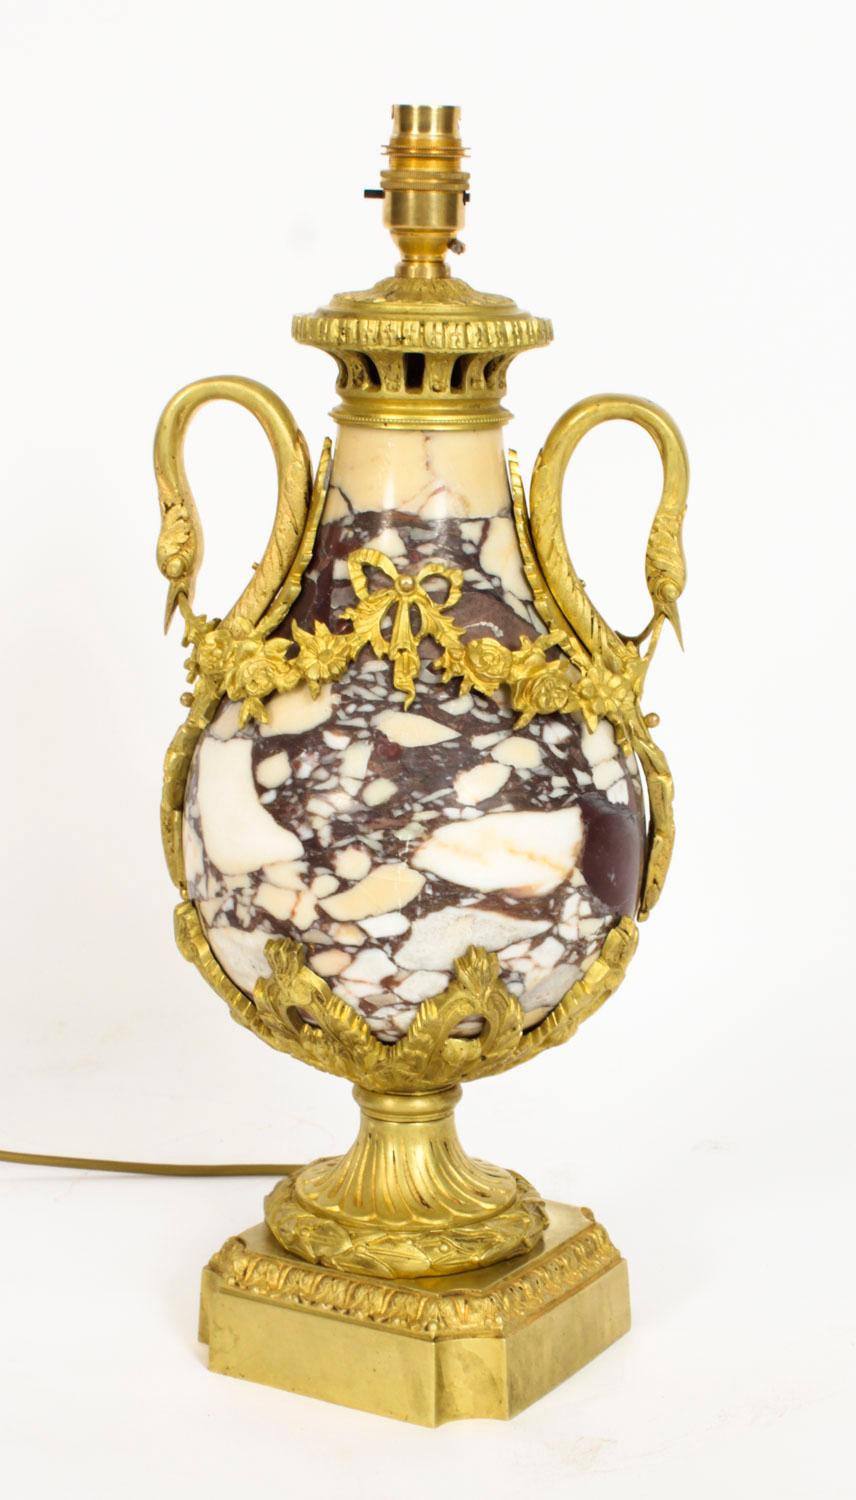 Antique French Louis XVI Revival Ormolu Mounted Marble Table Lamp 1860s For Sale 11